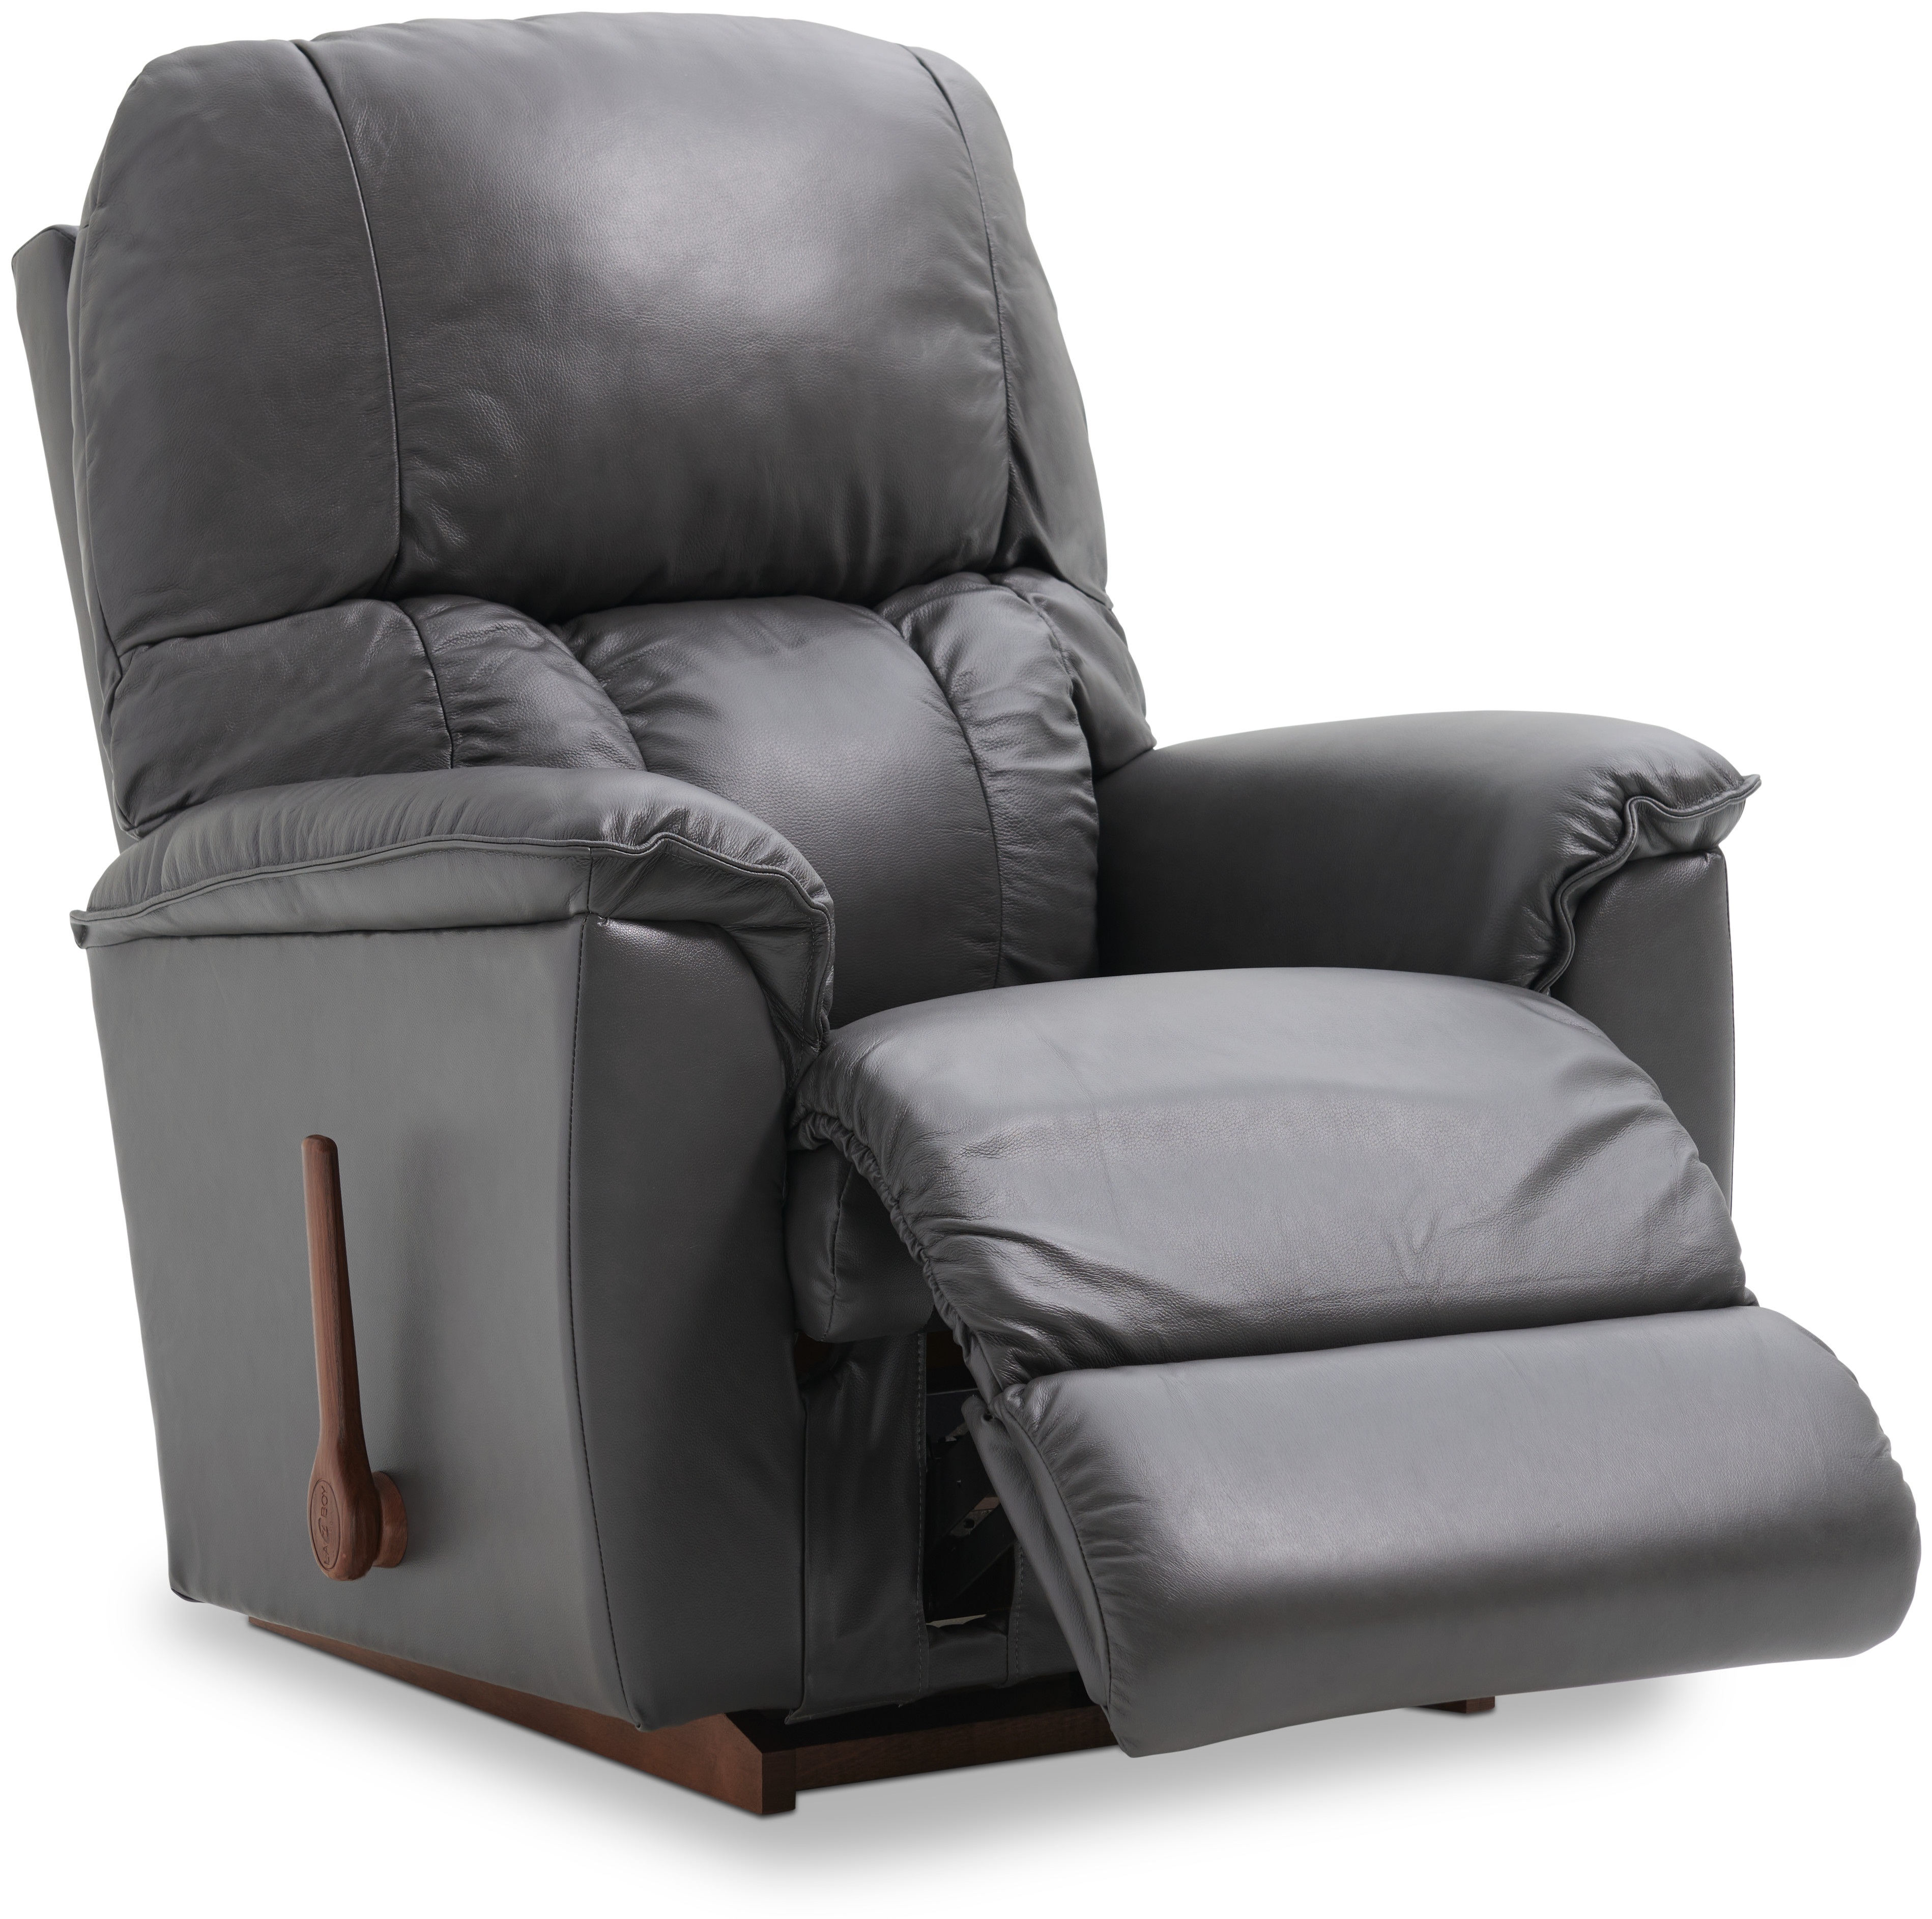 Image - 1 - Lawrence Leather Rocking Recliner